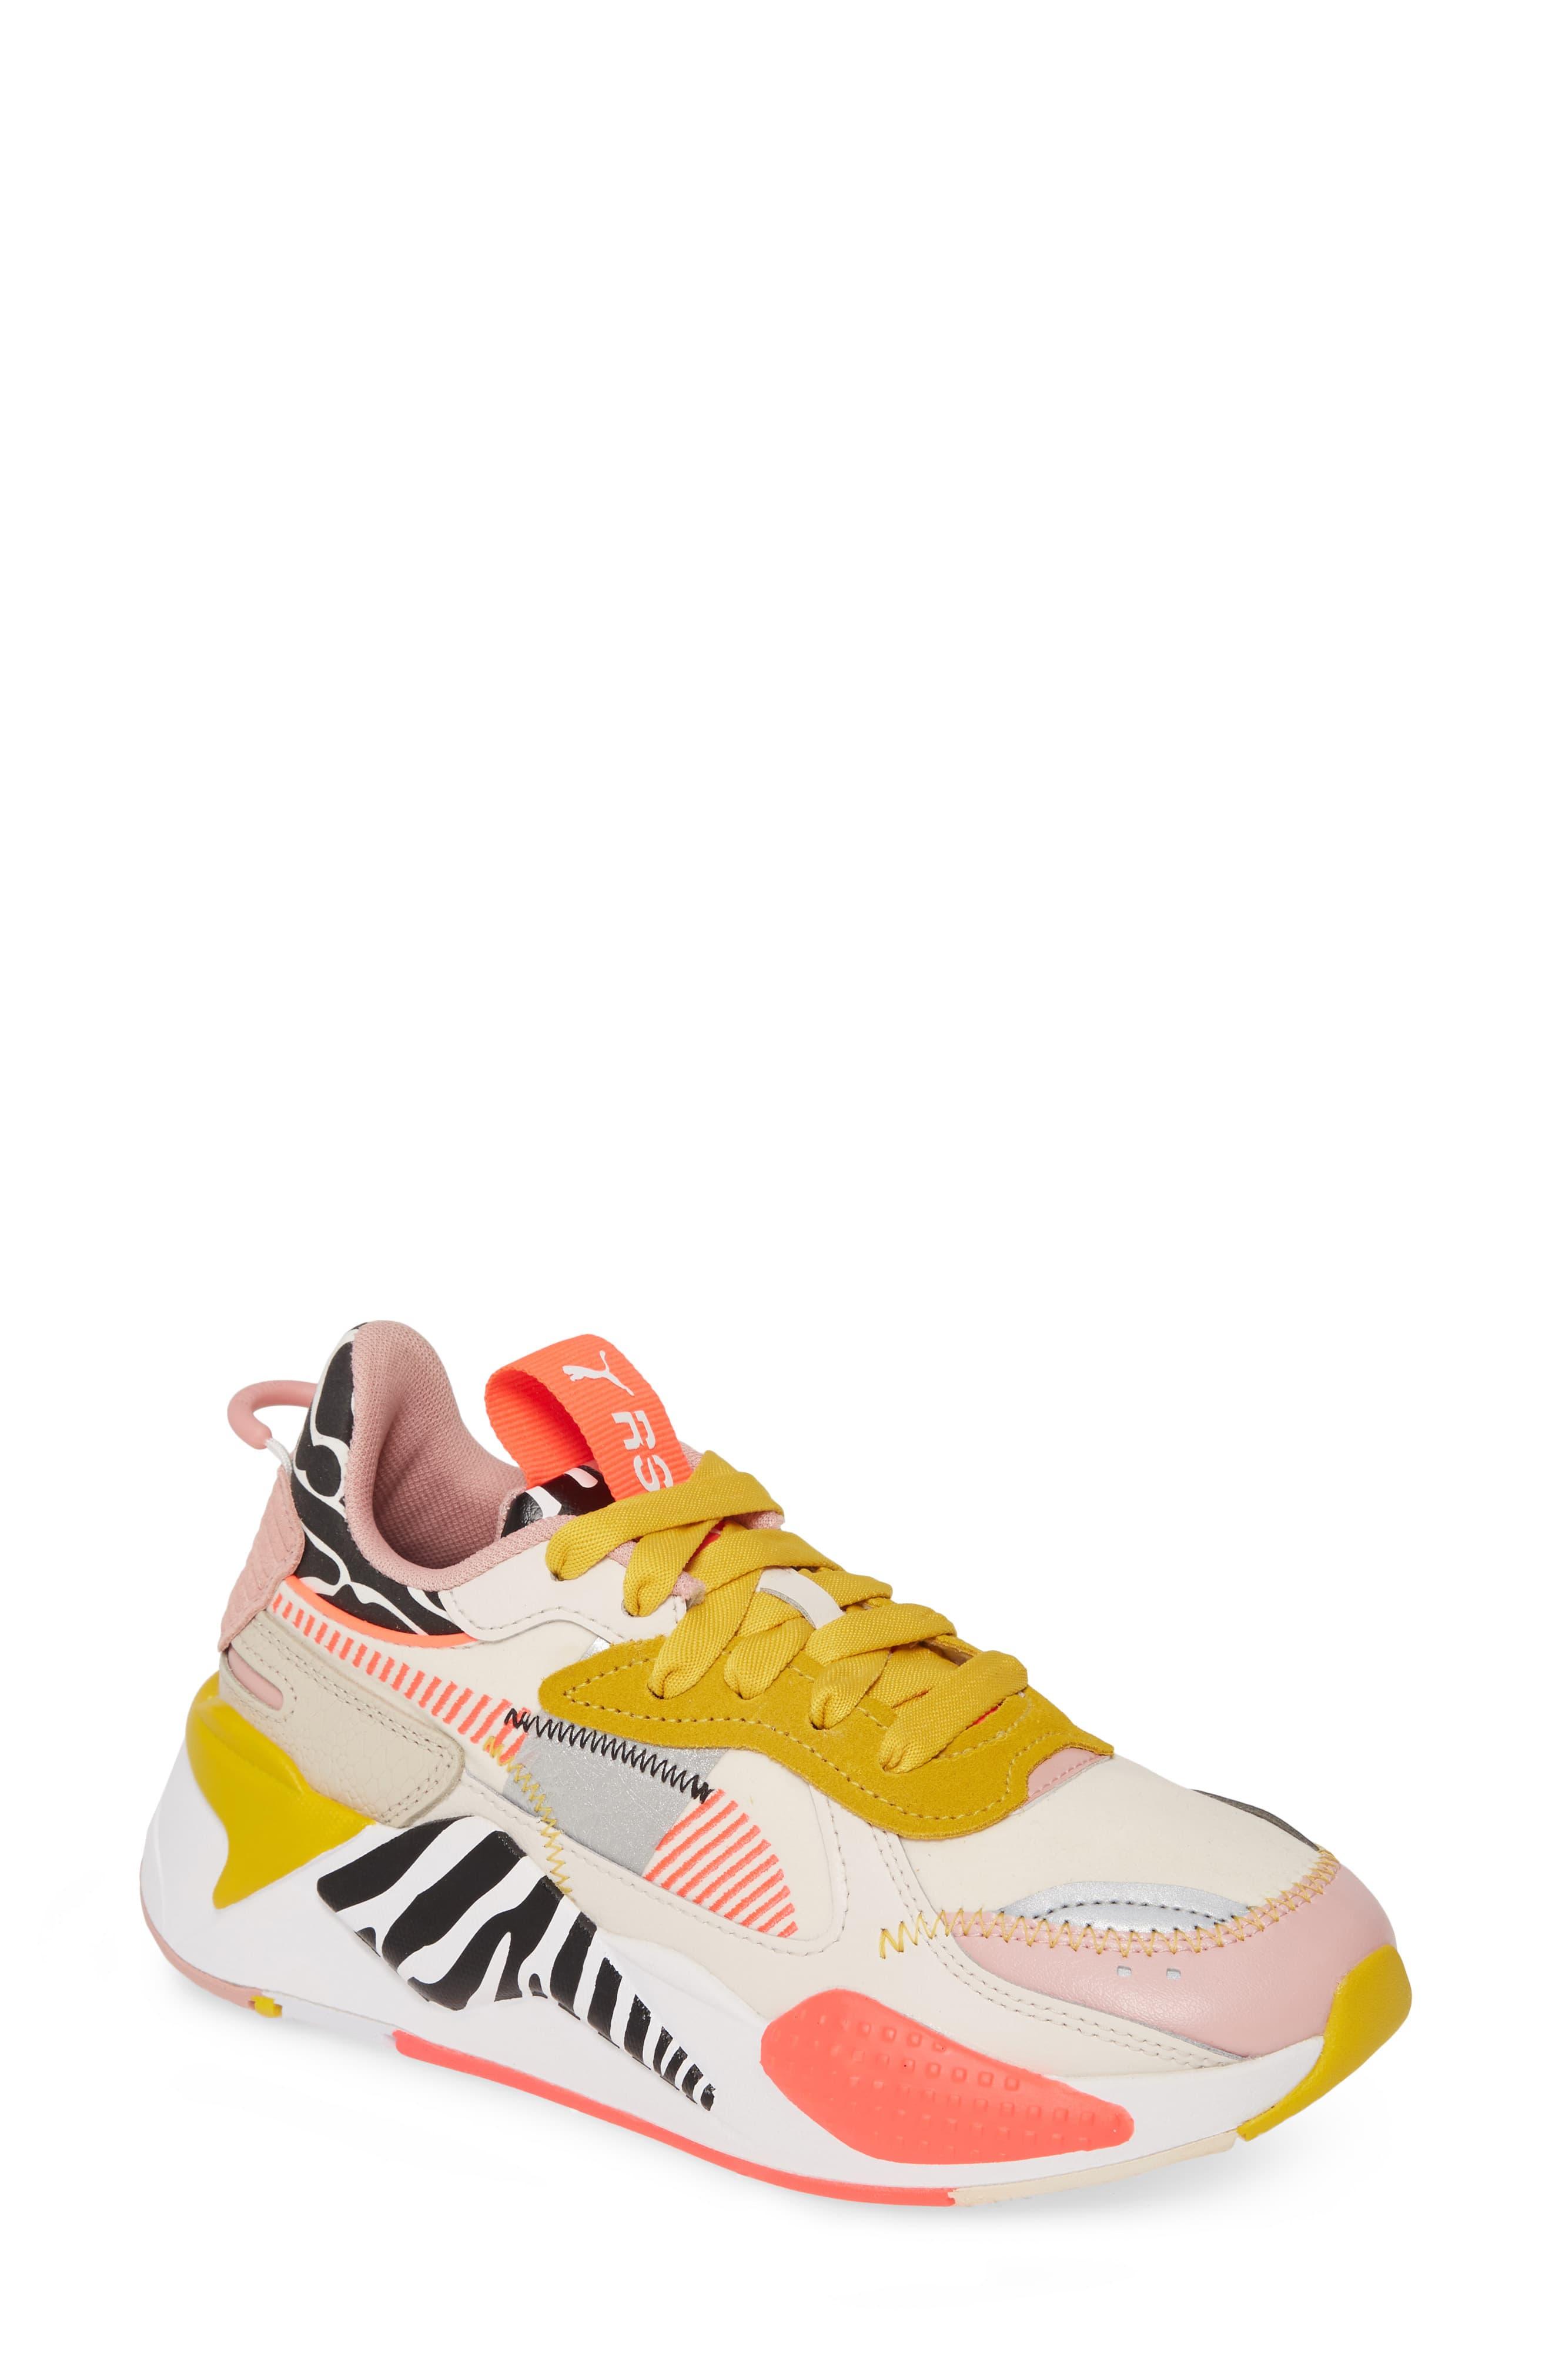 PUMA Rs-x Unexpected Mixes Sneaker - Lyst